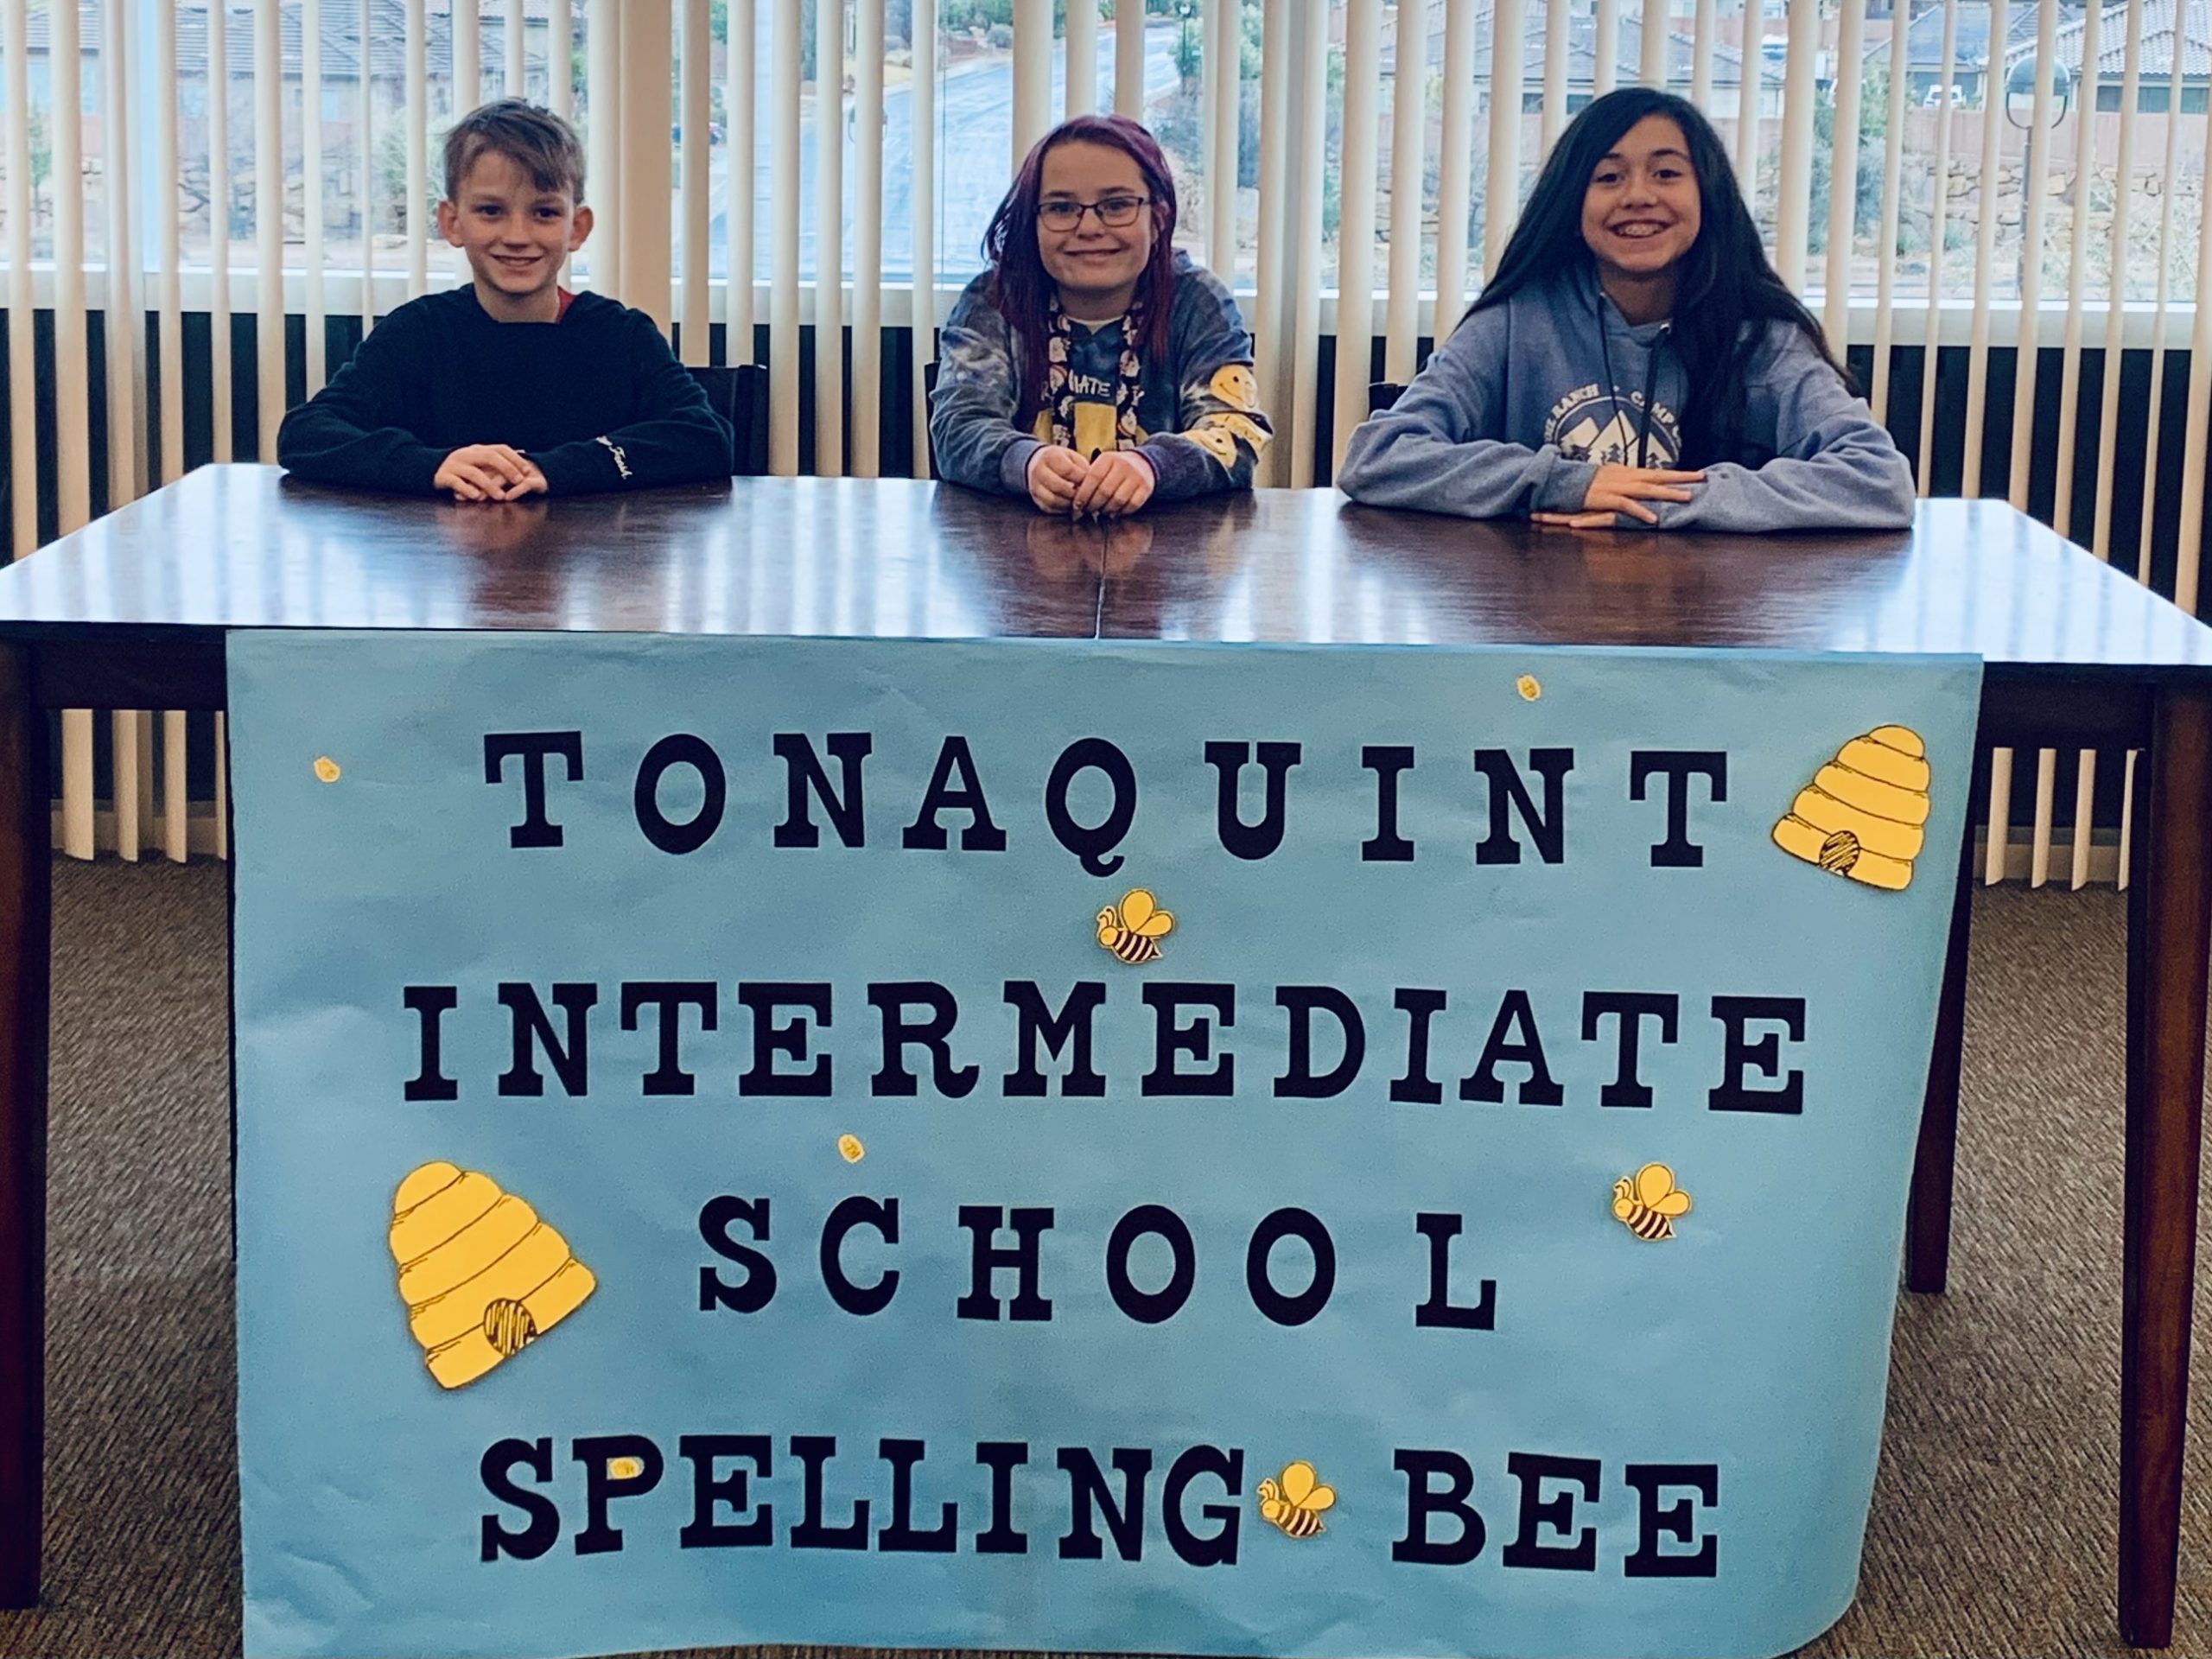 Tonaquint's top three spellers sit at a table with the "Tonaquint Spelling Bee" sign taped to it.